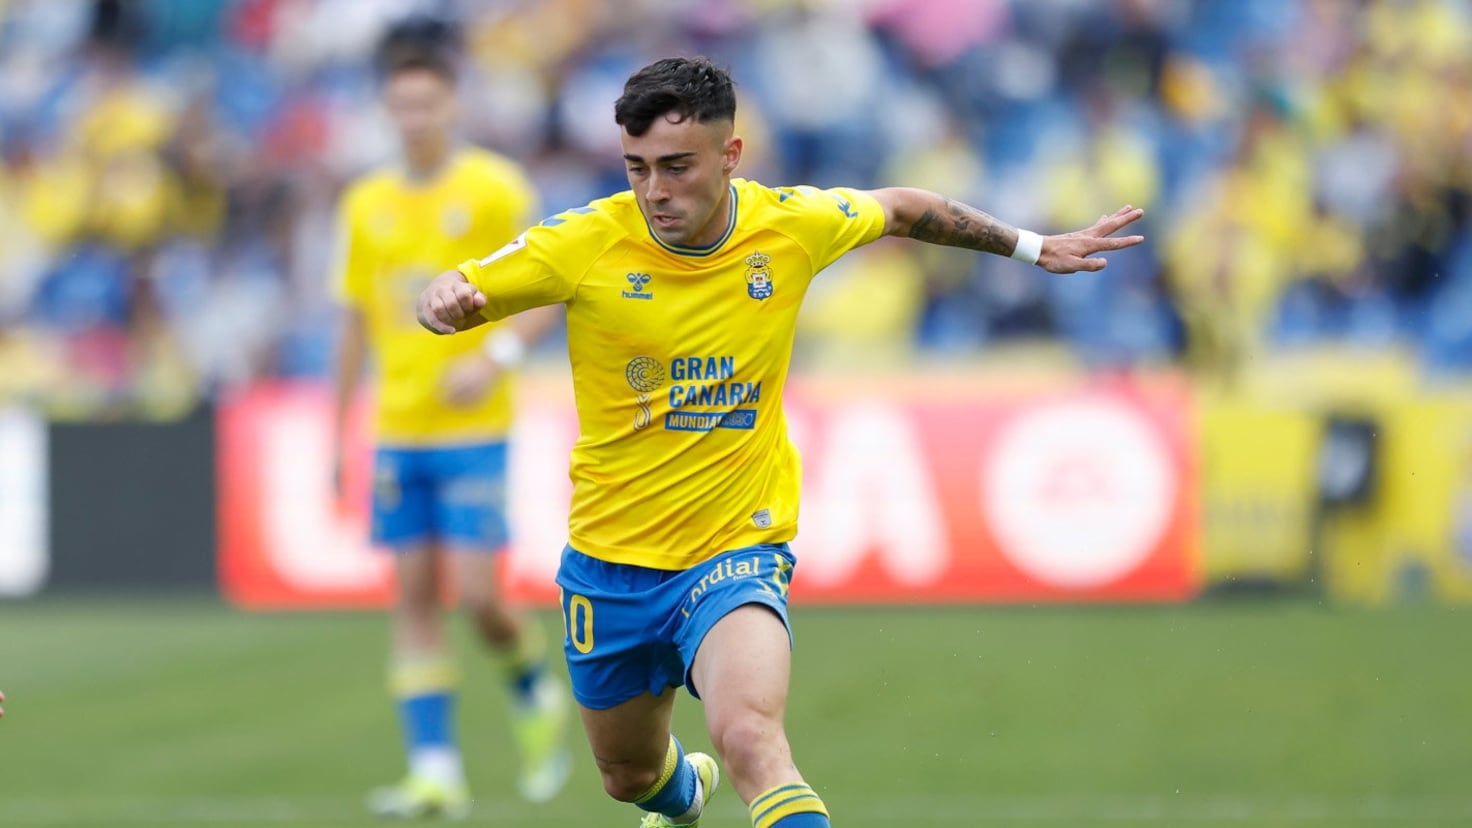 Alberto Moleiro: The Rising Star Courted by Liverpool and Inter Milan for a Summer Move